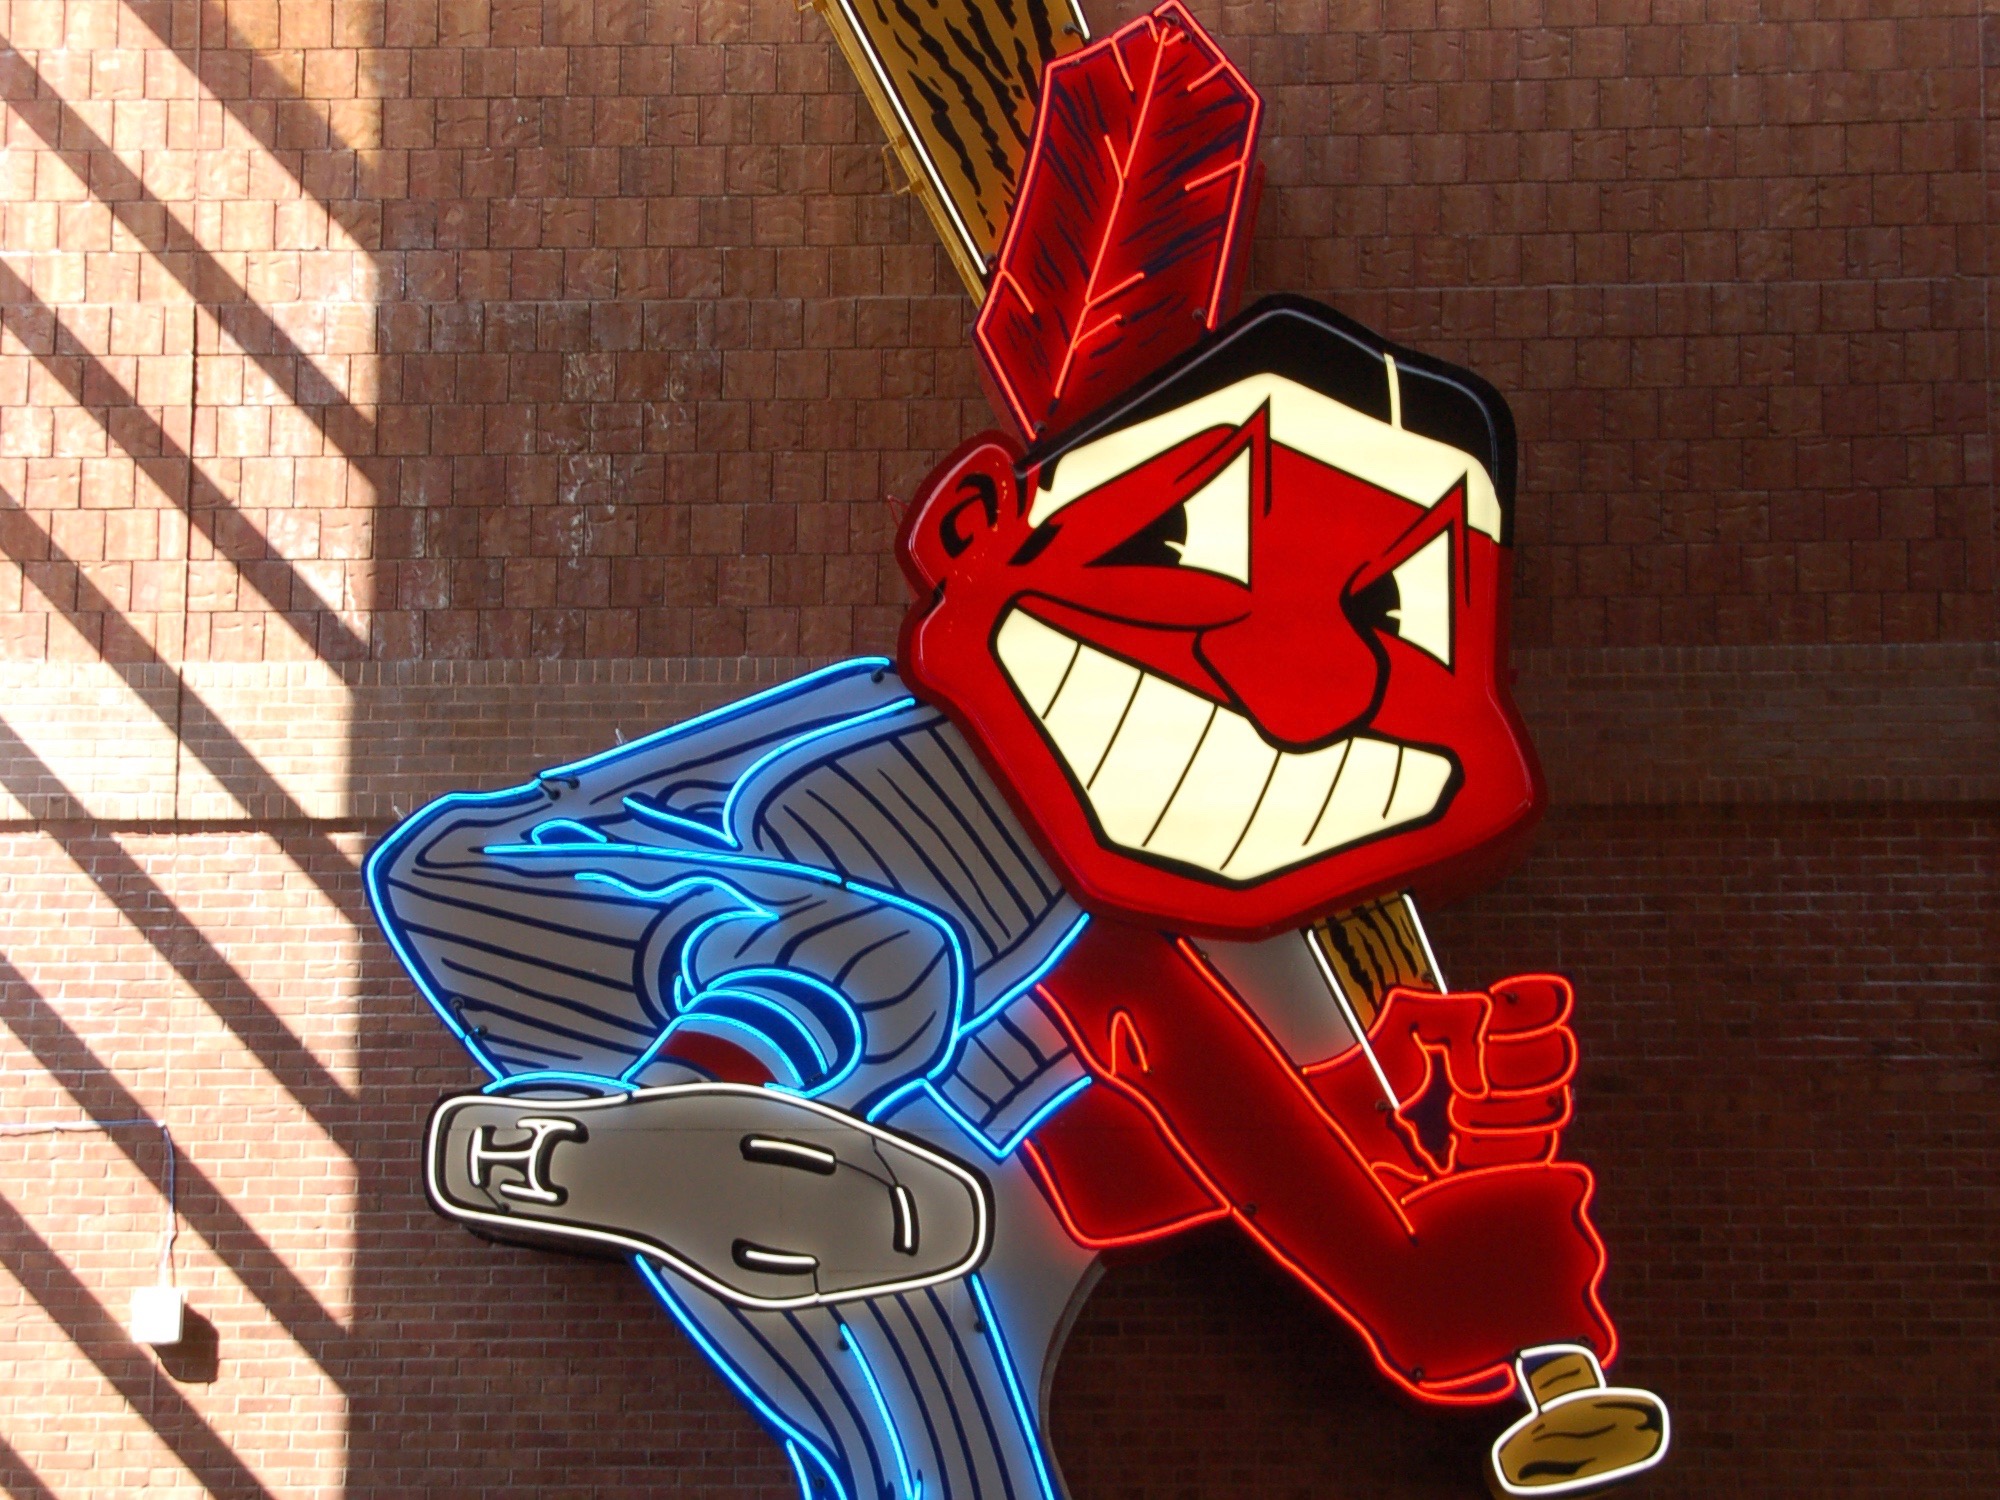 Chief Wahoo makes last Opening Day appearance on a Tribe uniform